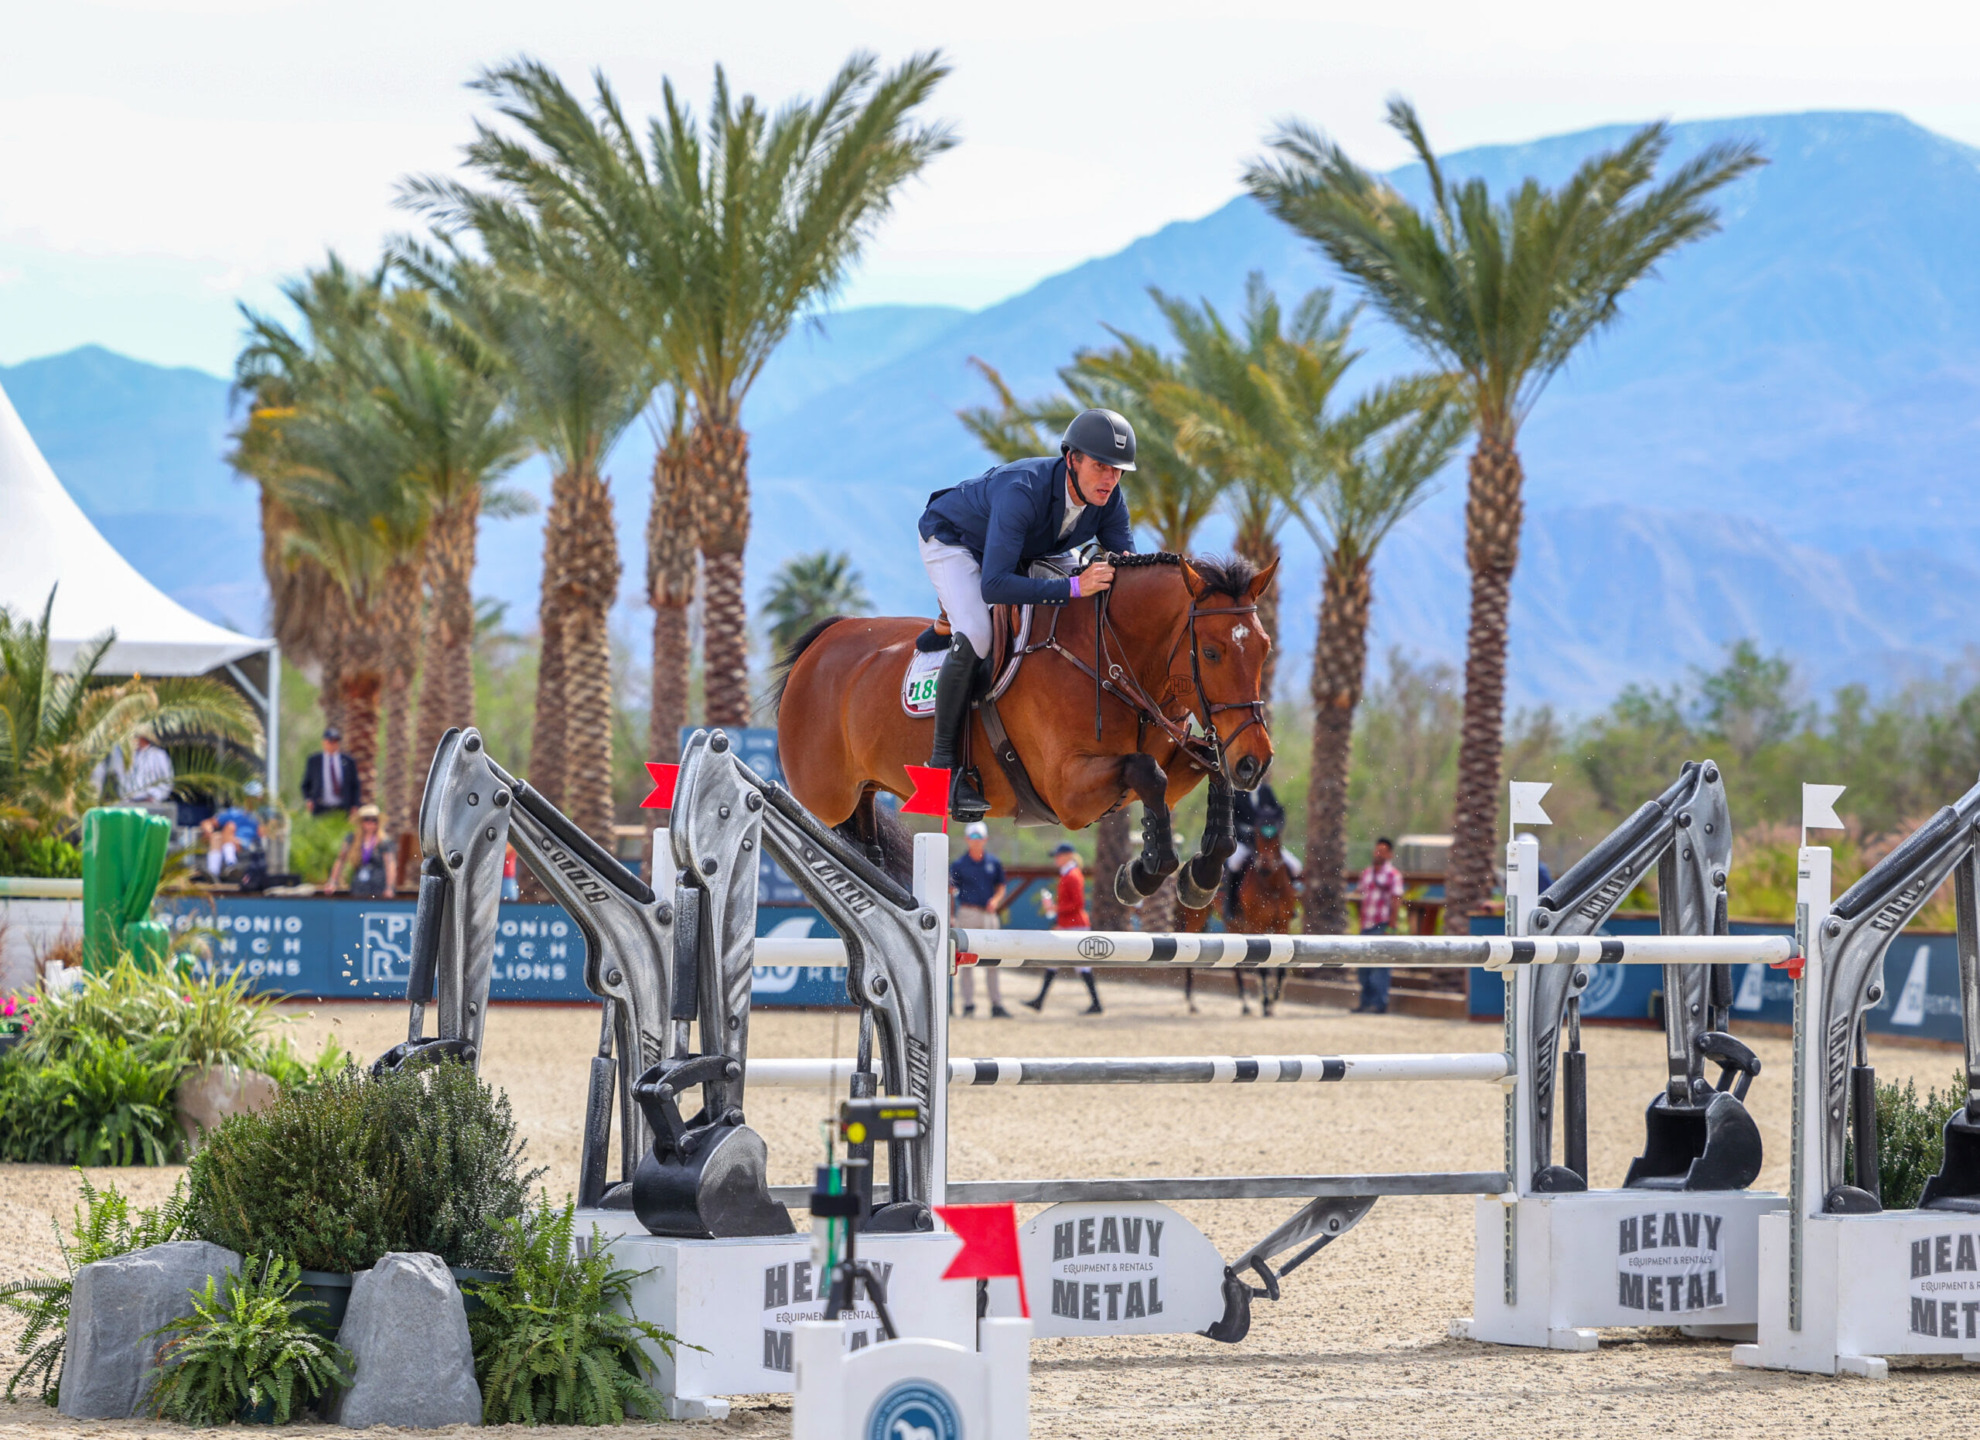 Gregory Wathelet (BEL) and Kristalic. Photo by High Desert Sport Photo